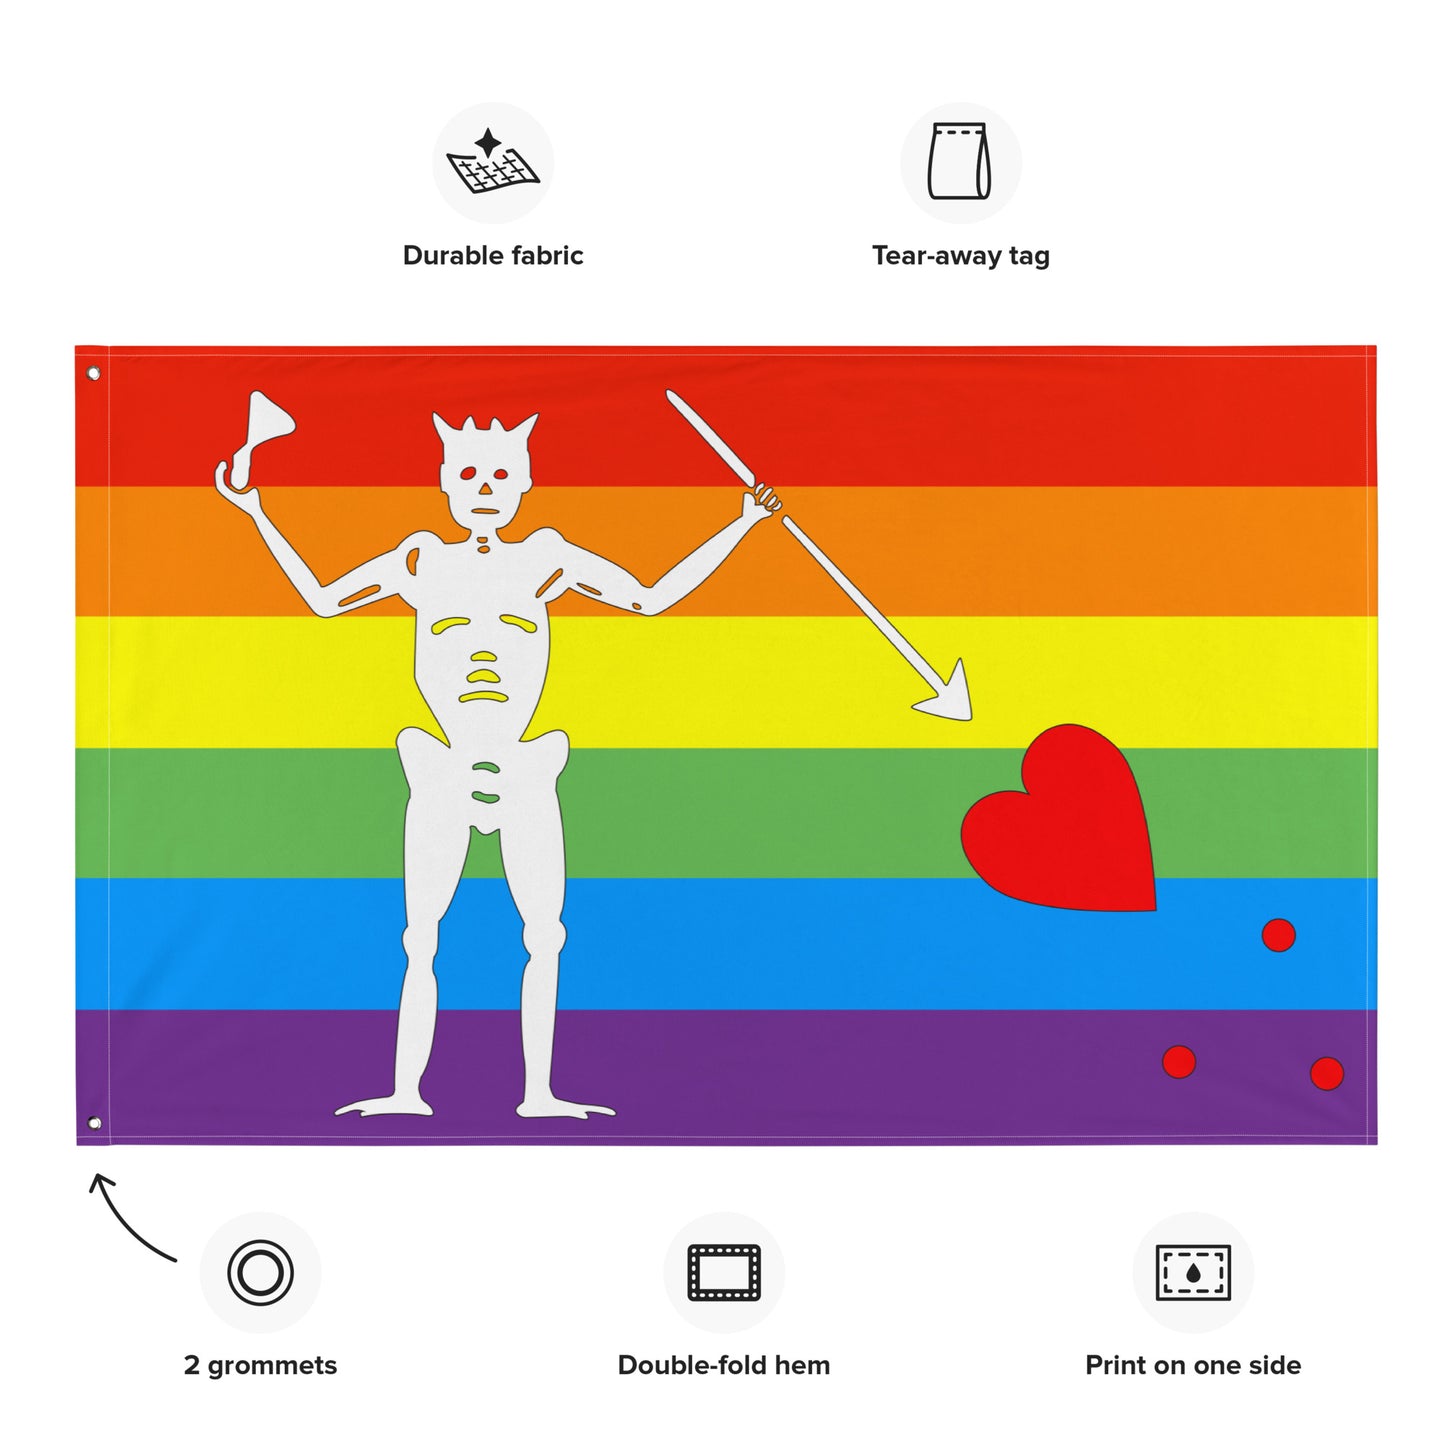 the rainbow flag with blackbeard's symbol surrounded by the specifications of "durable fabric, tear-away tag, 2 grommets, double-fold hem, print on one side"